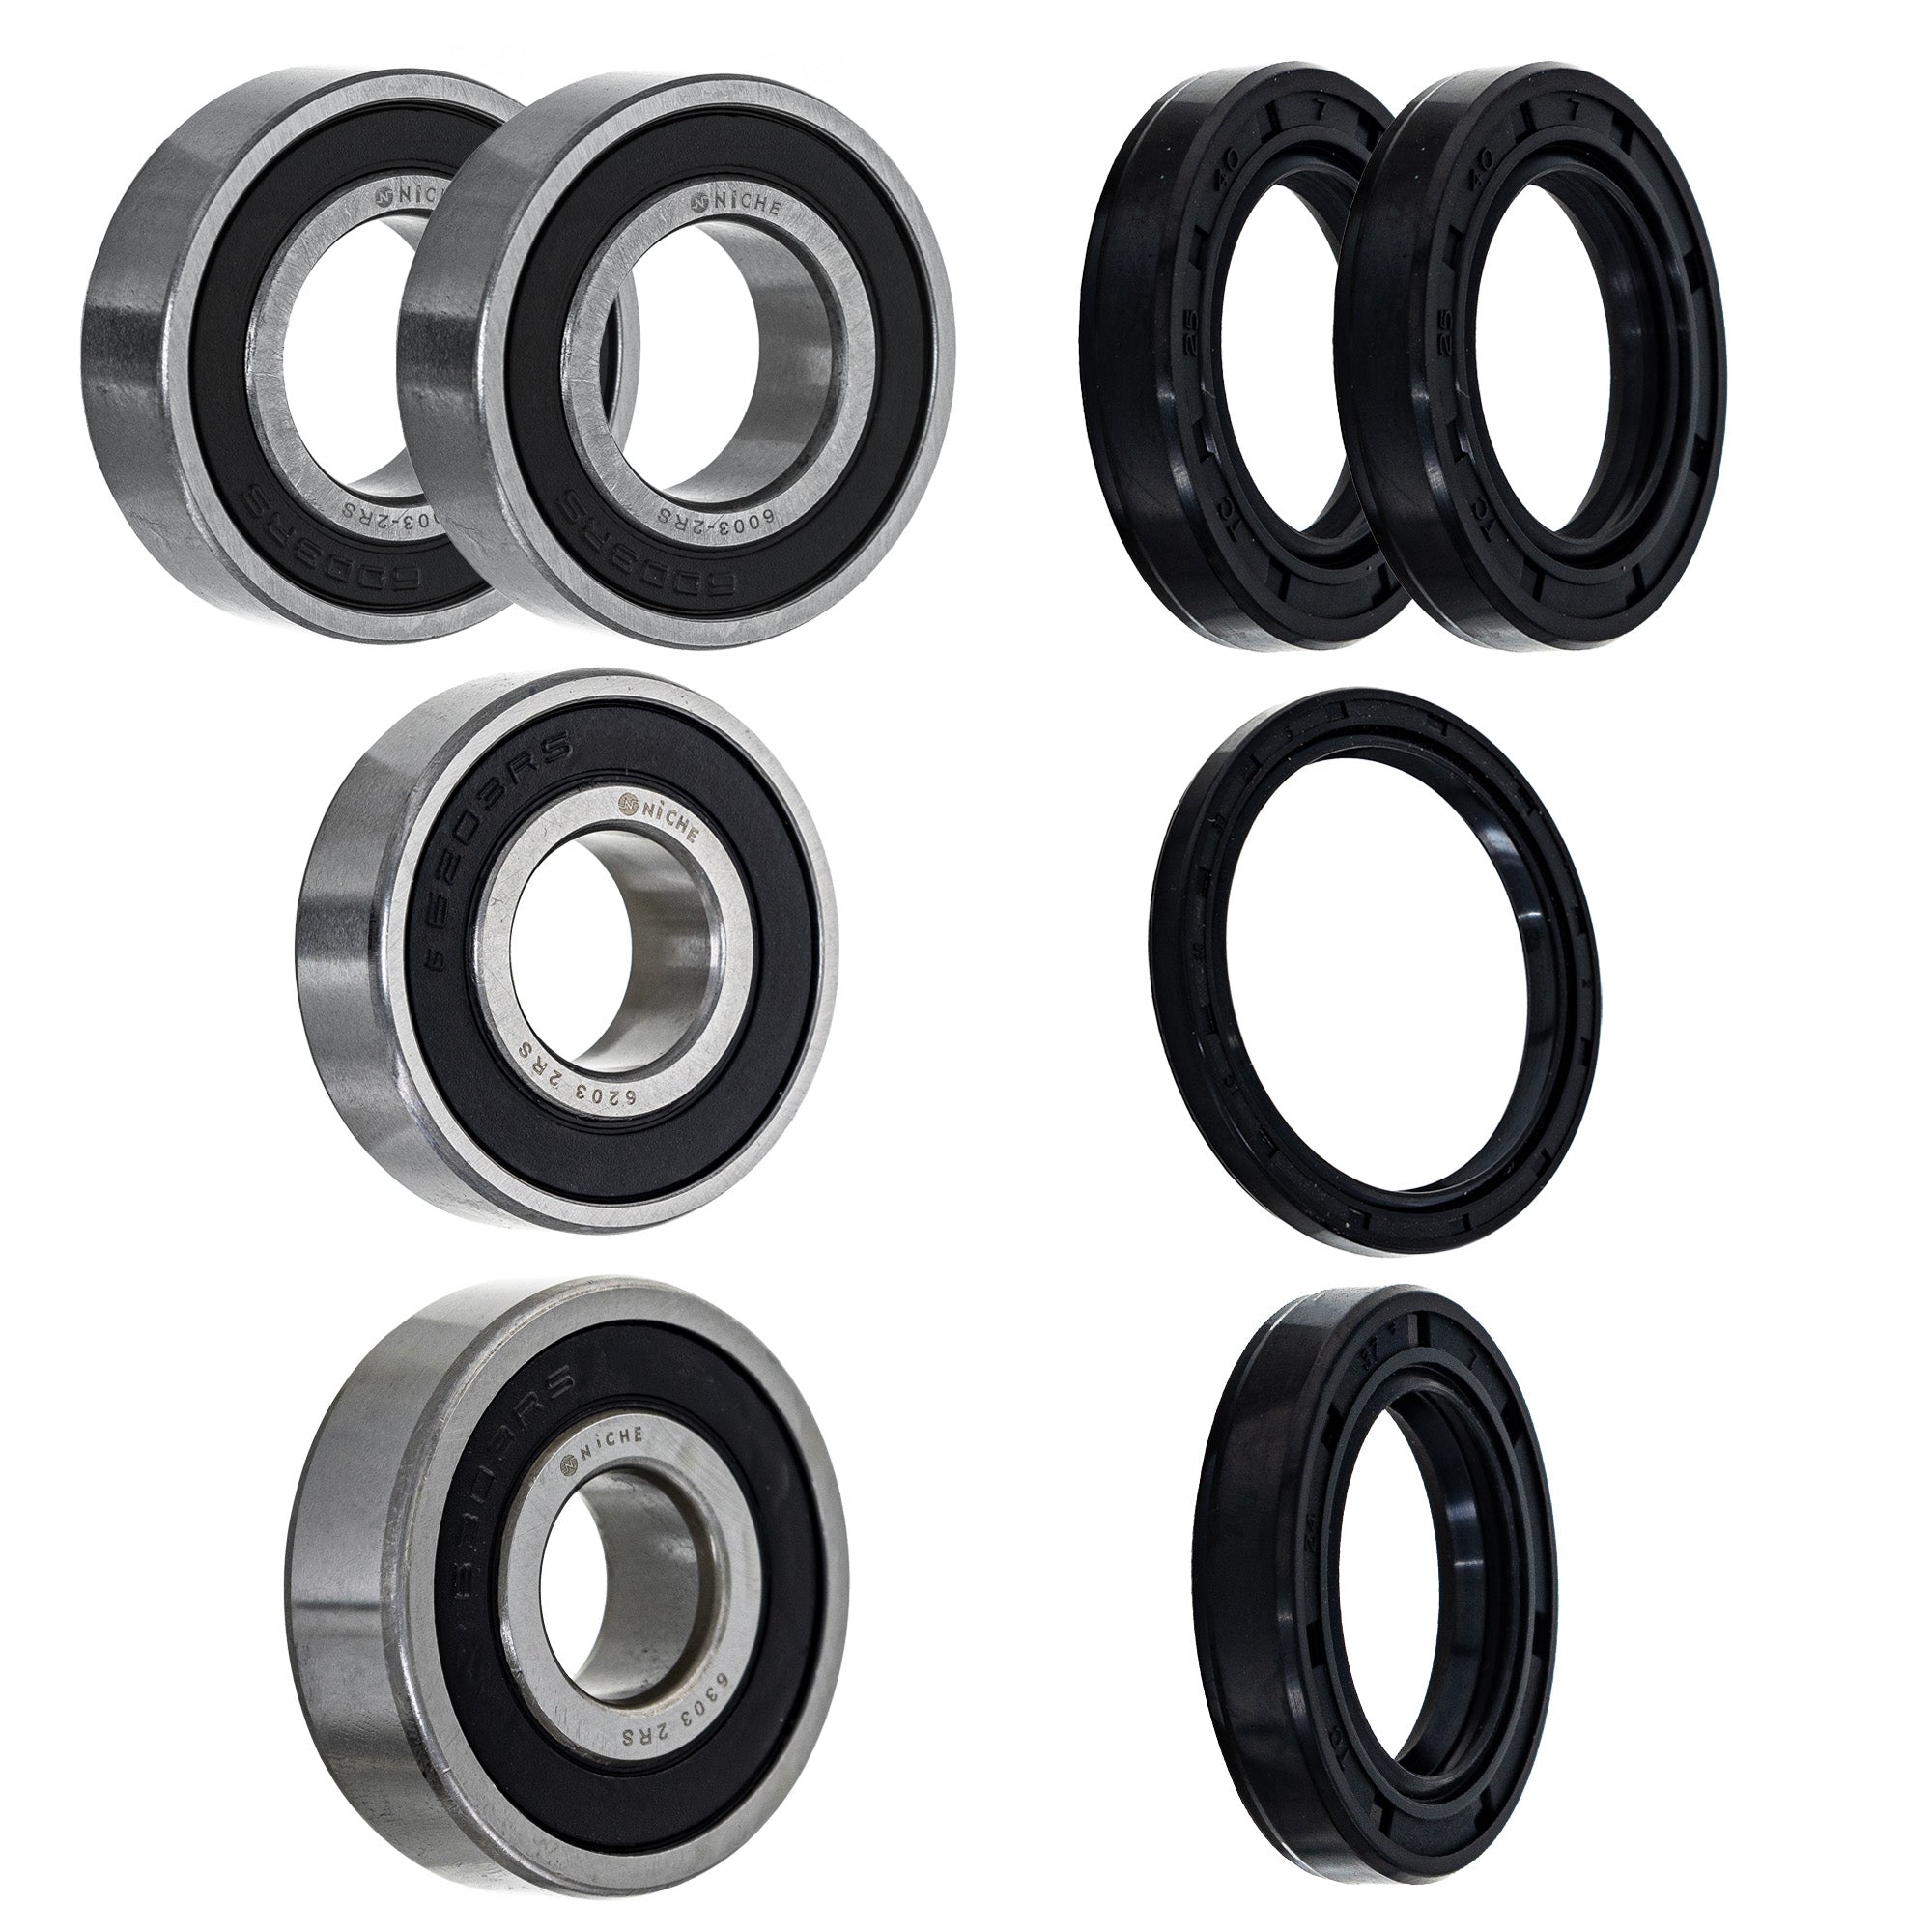 Wheel Bearing Seal Kit for zOTHER Ref No XR650L NICHE MK1008757